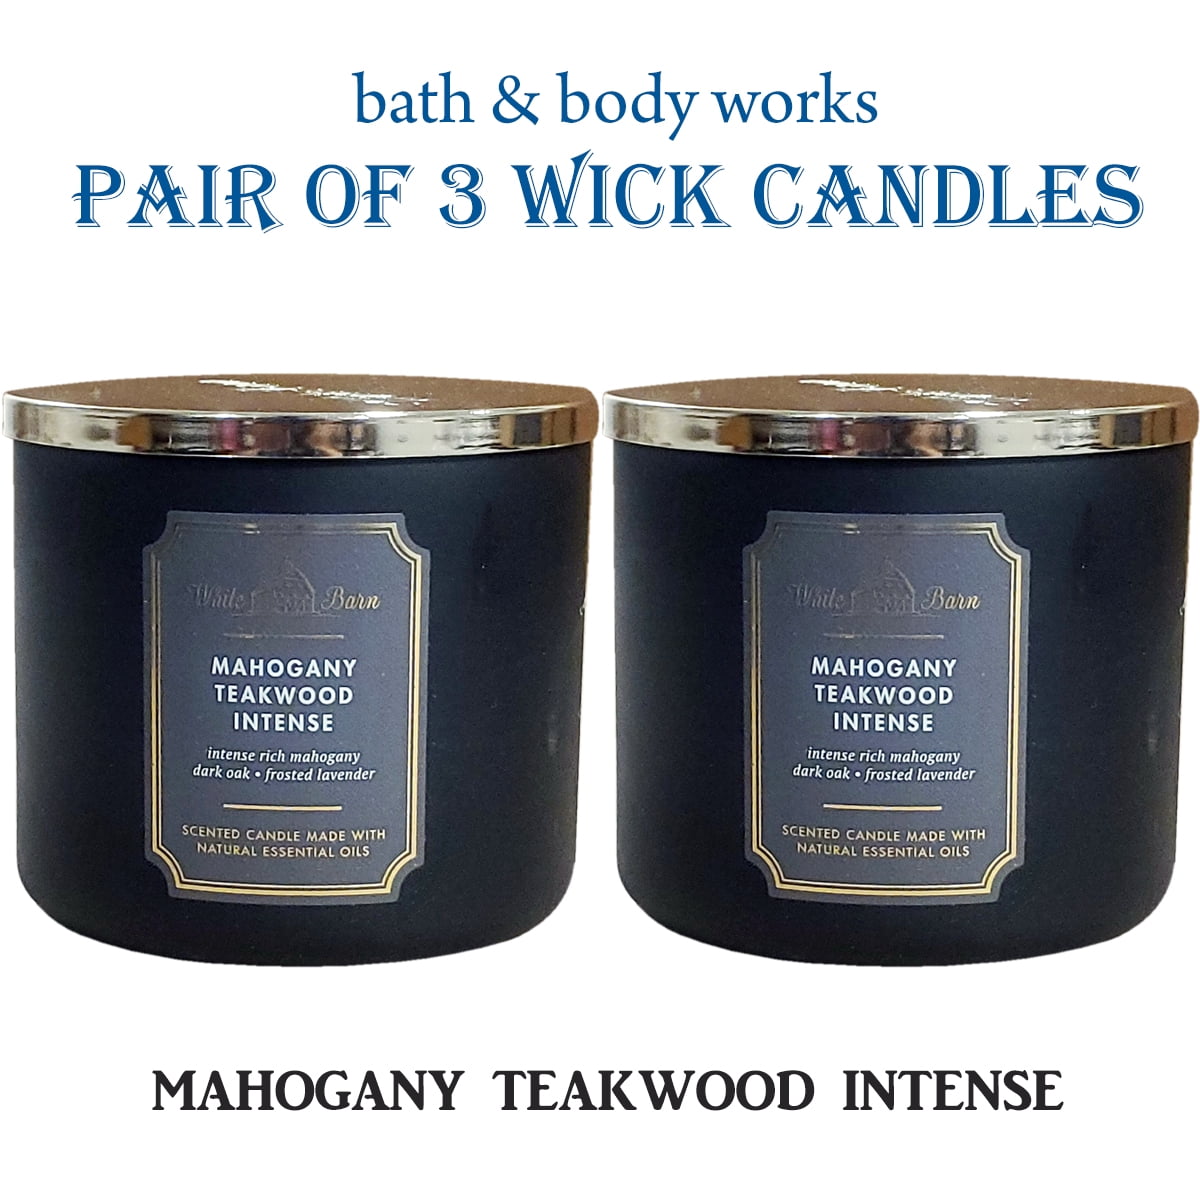 Bath & Body Works Mahogany Teakwood Intense 3 Wick Scented Candle Set of 2